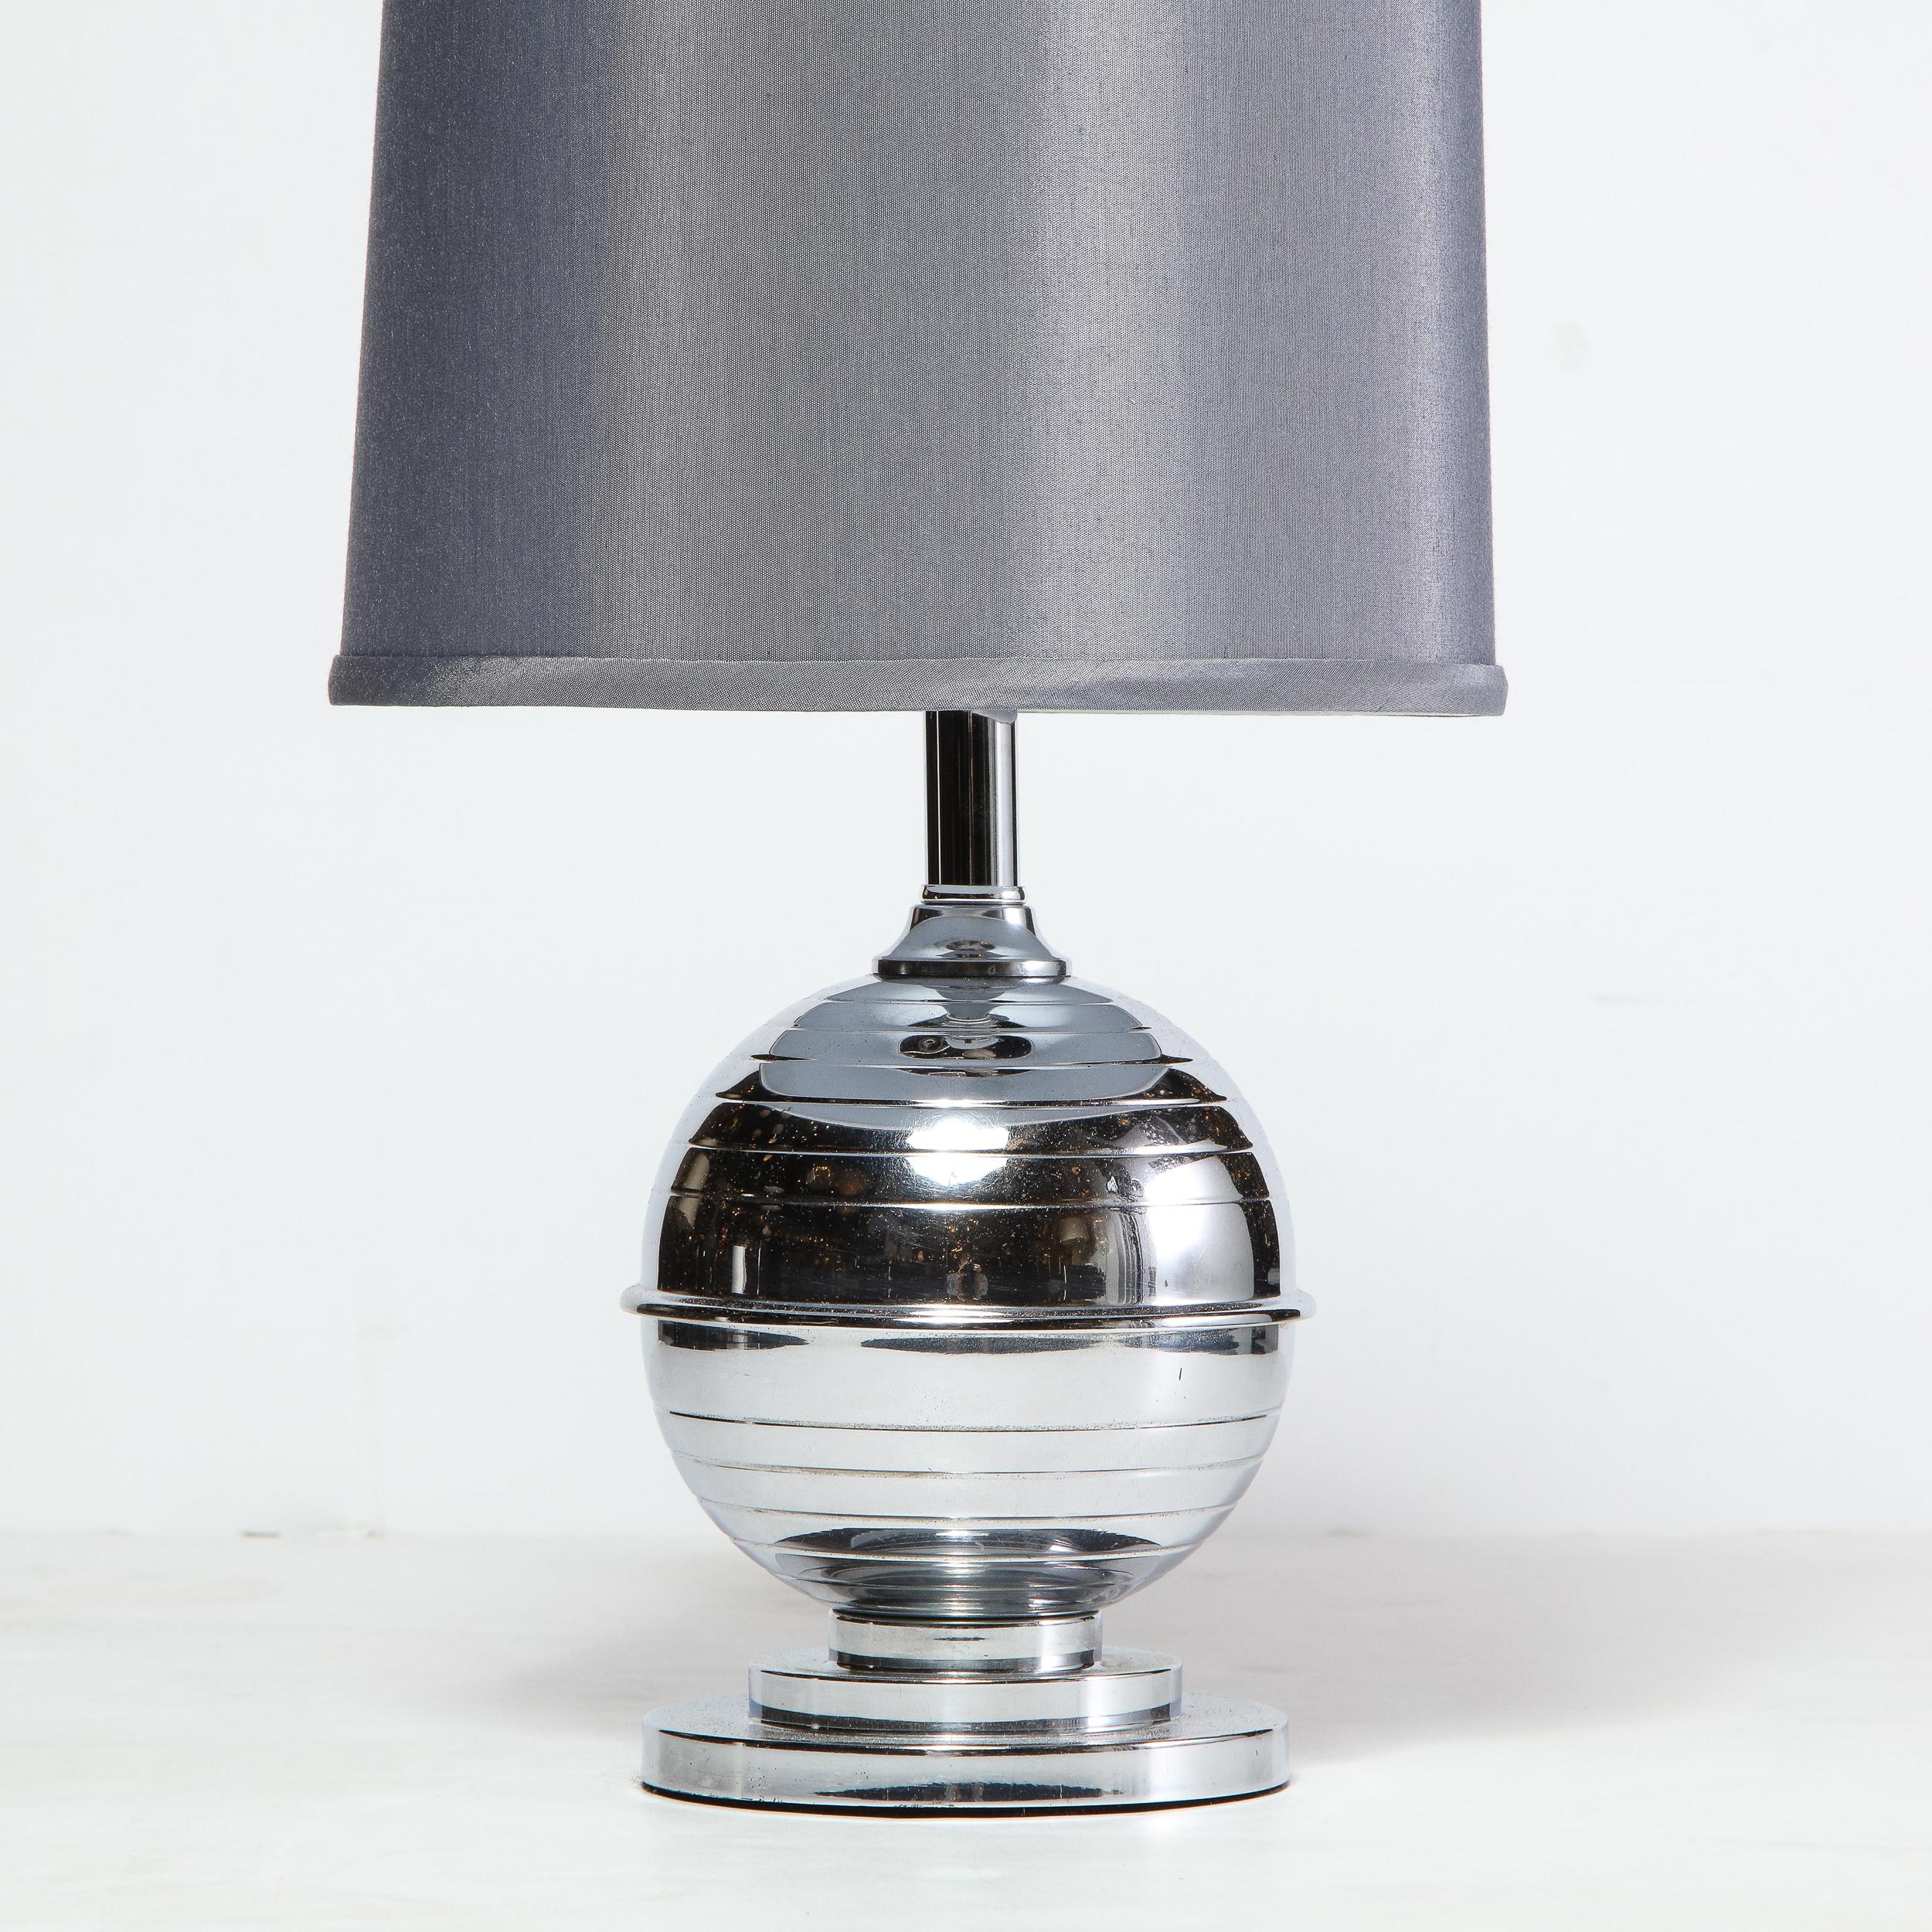 This stunning Art Deco Machine Age table lamp was realized in the United States, circa 1935. It features a two tiered skyscraper style base that ascends into a spherical banded body in polished chrome with a tapered neck. With its clean modernist